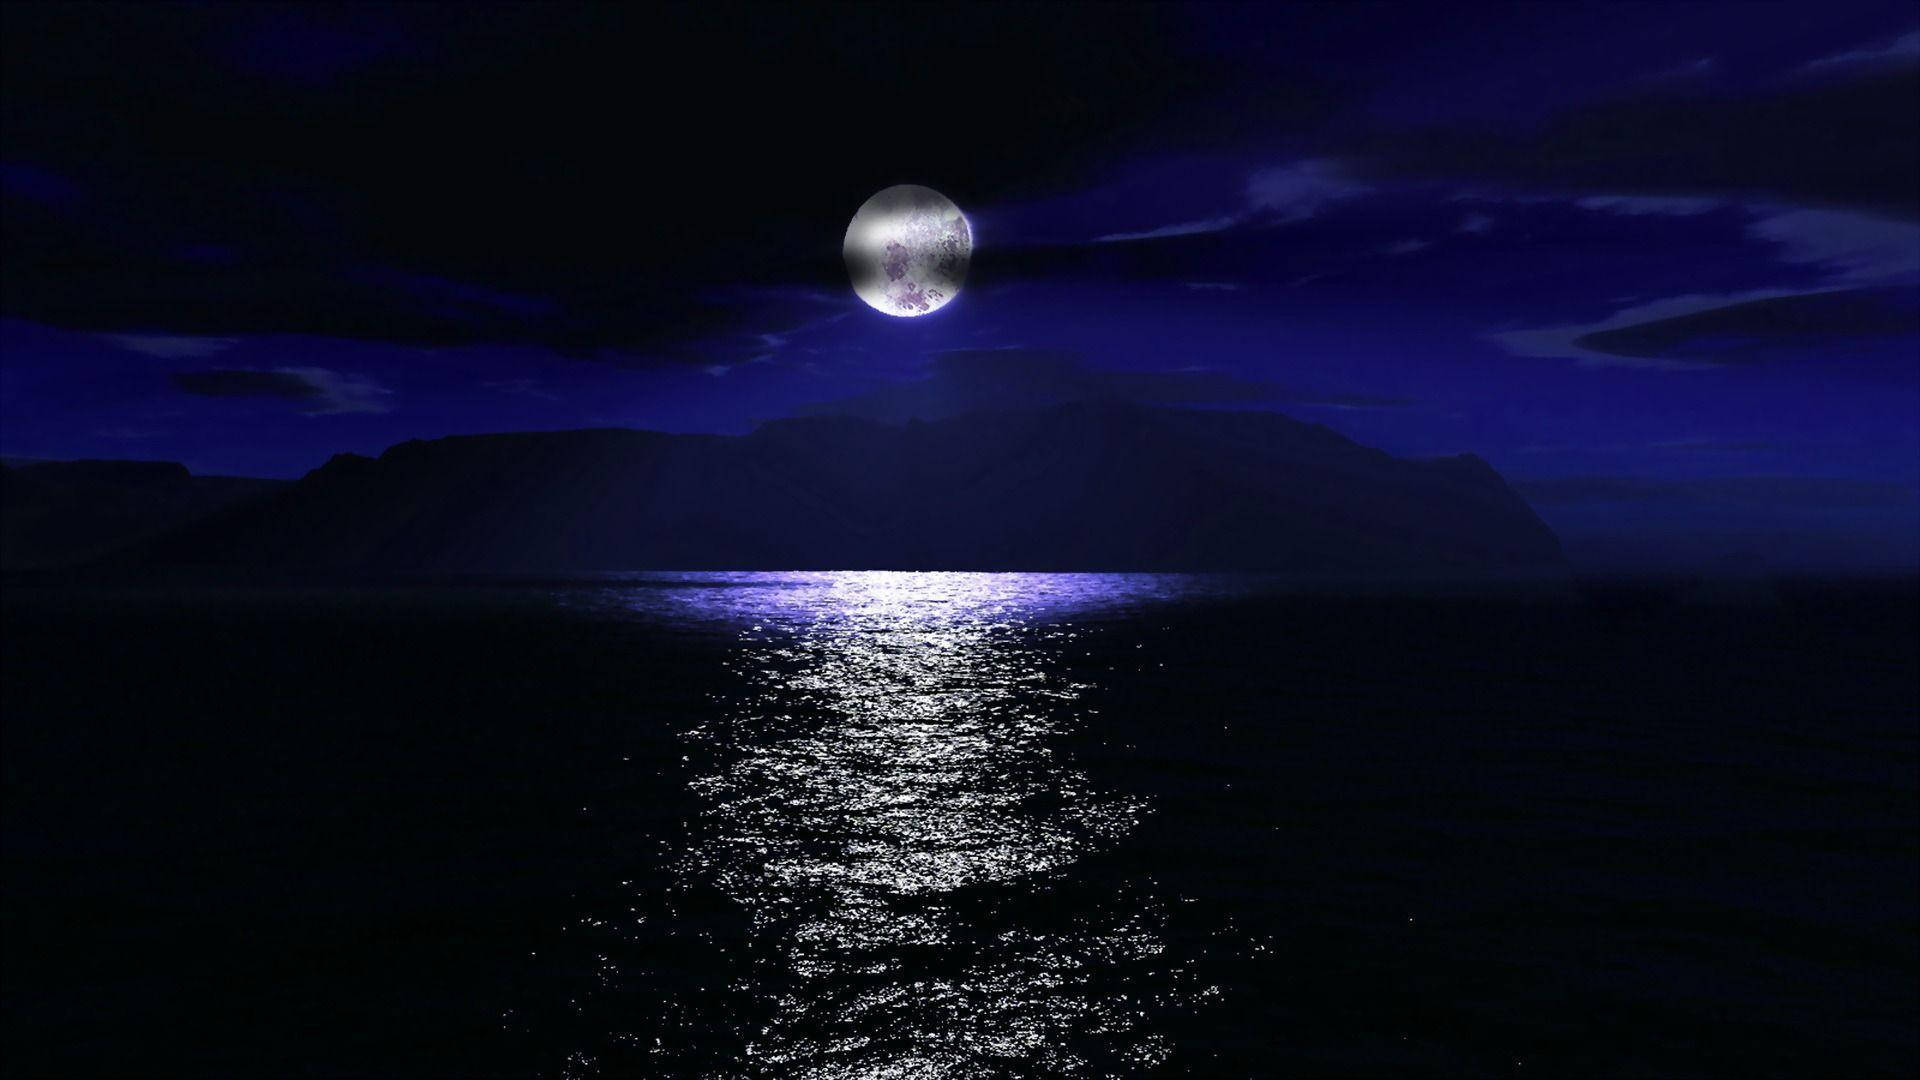 Ocean During Nighttime With Moon Wallpapers